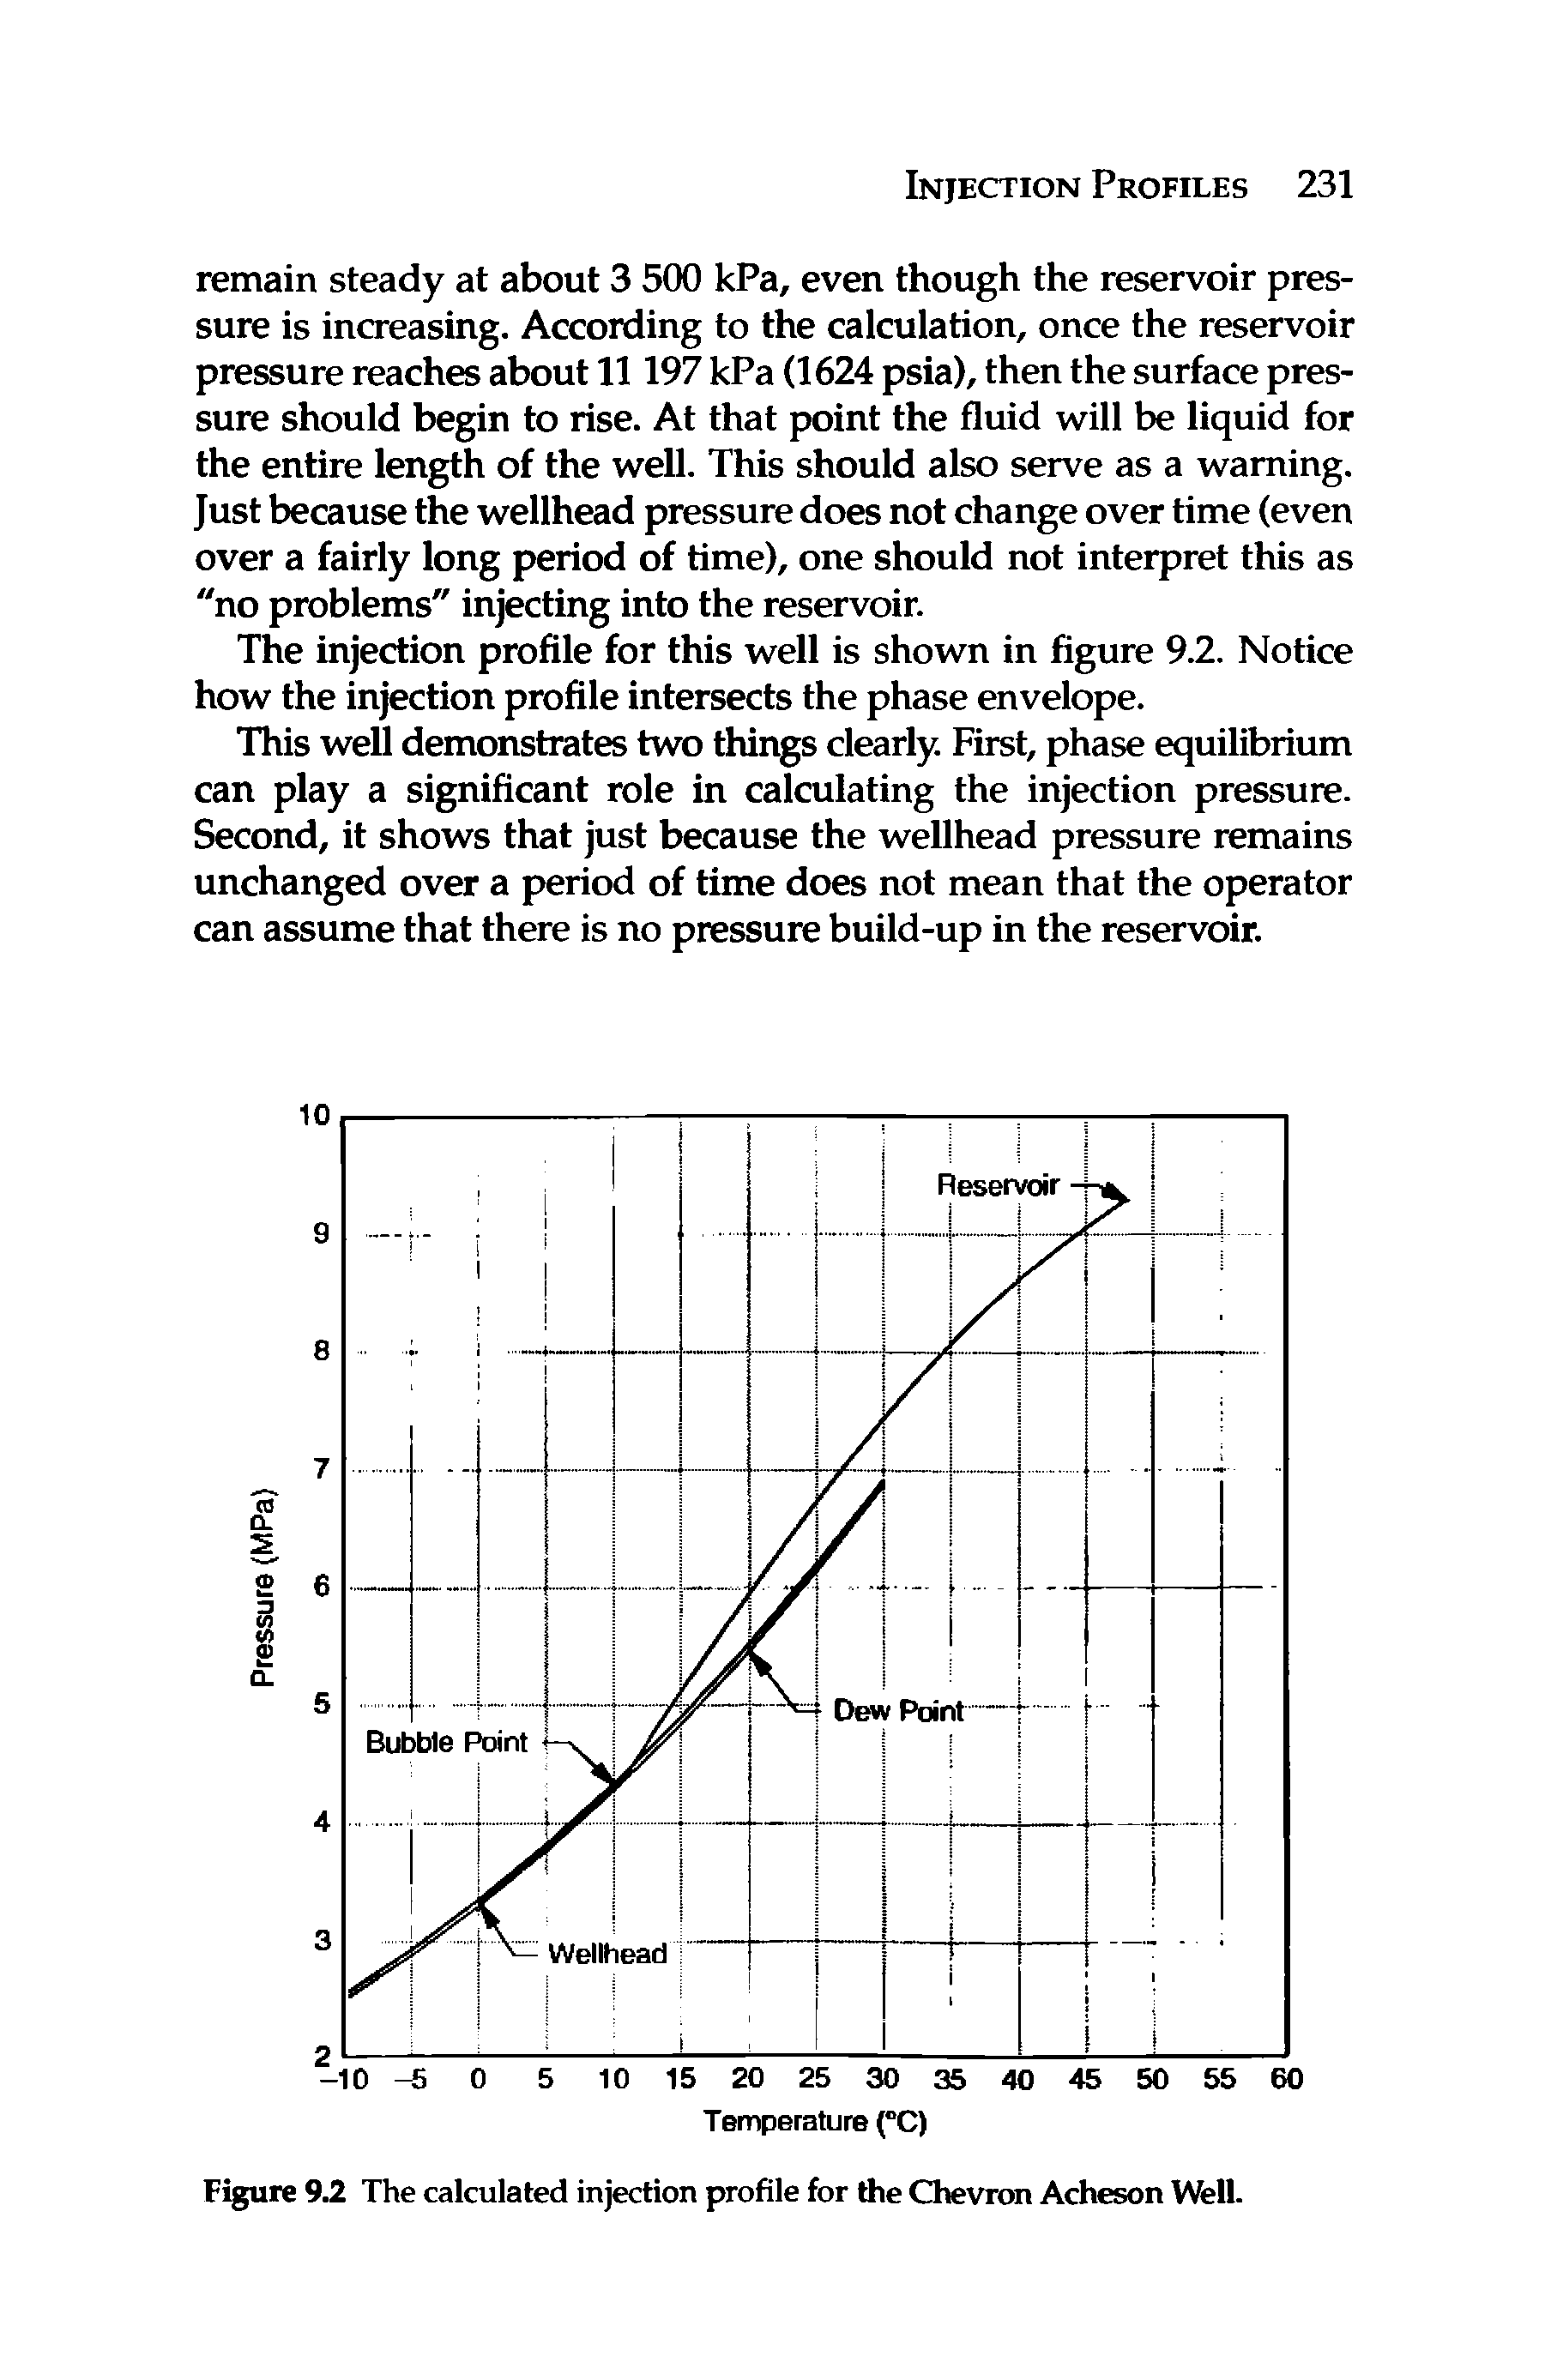 Figure 9.2 The calculated injection profile for the Chevron Acheson Well.